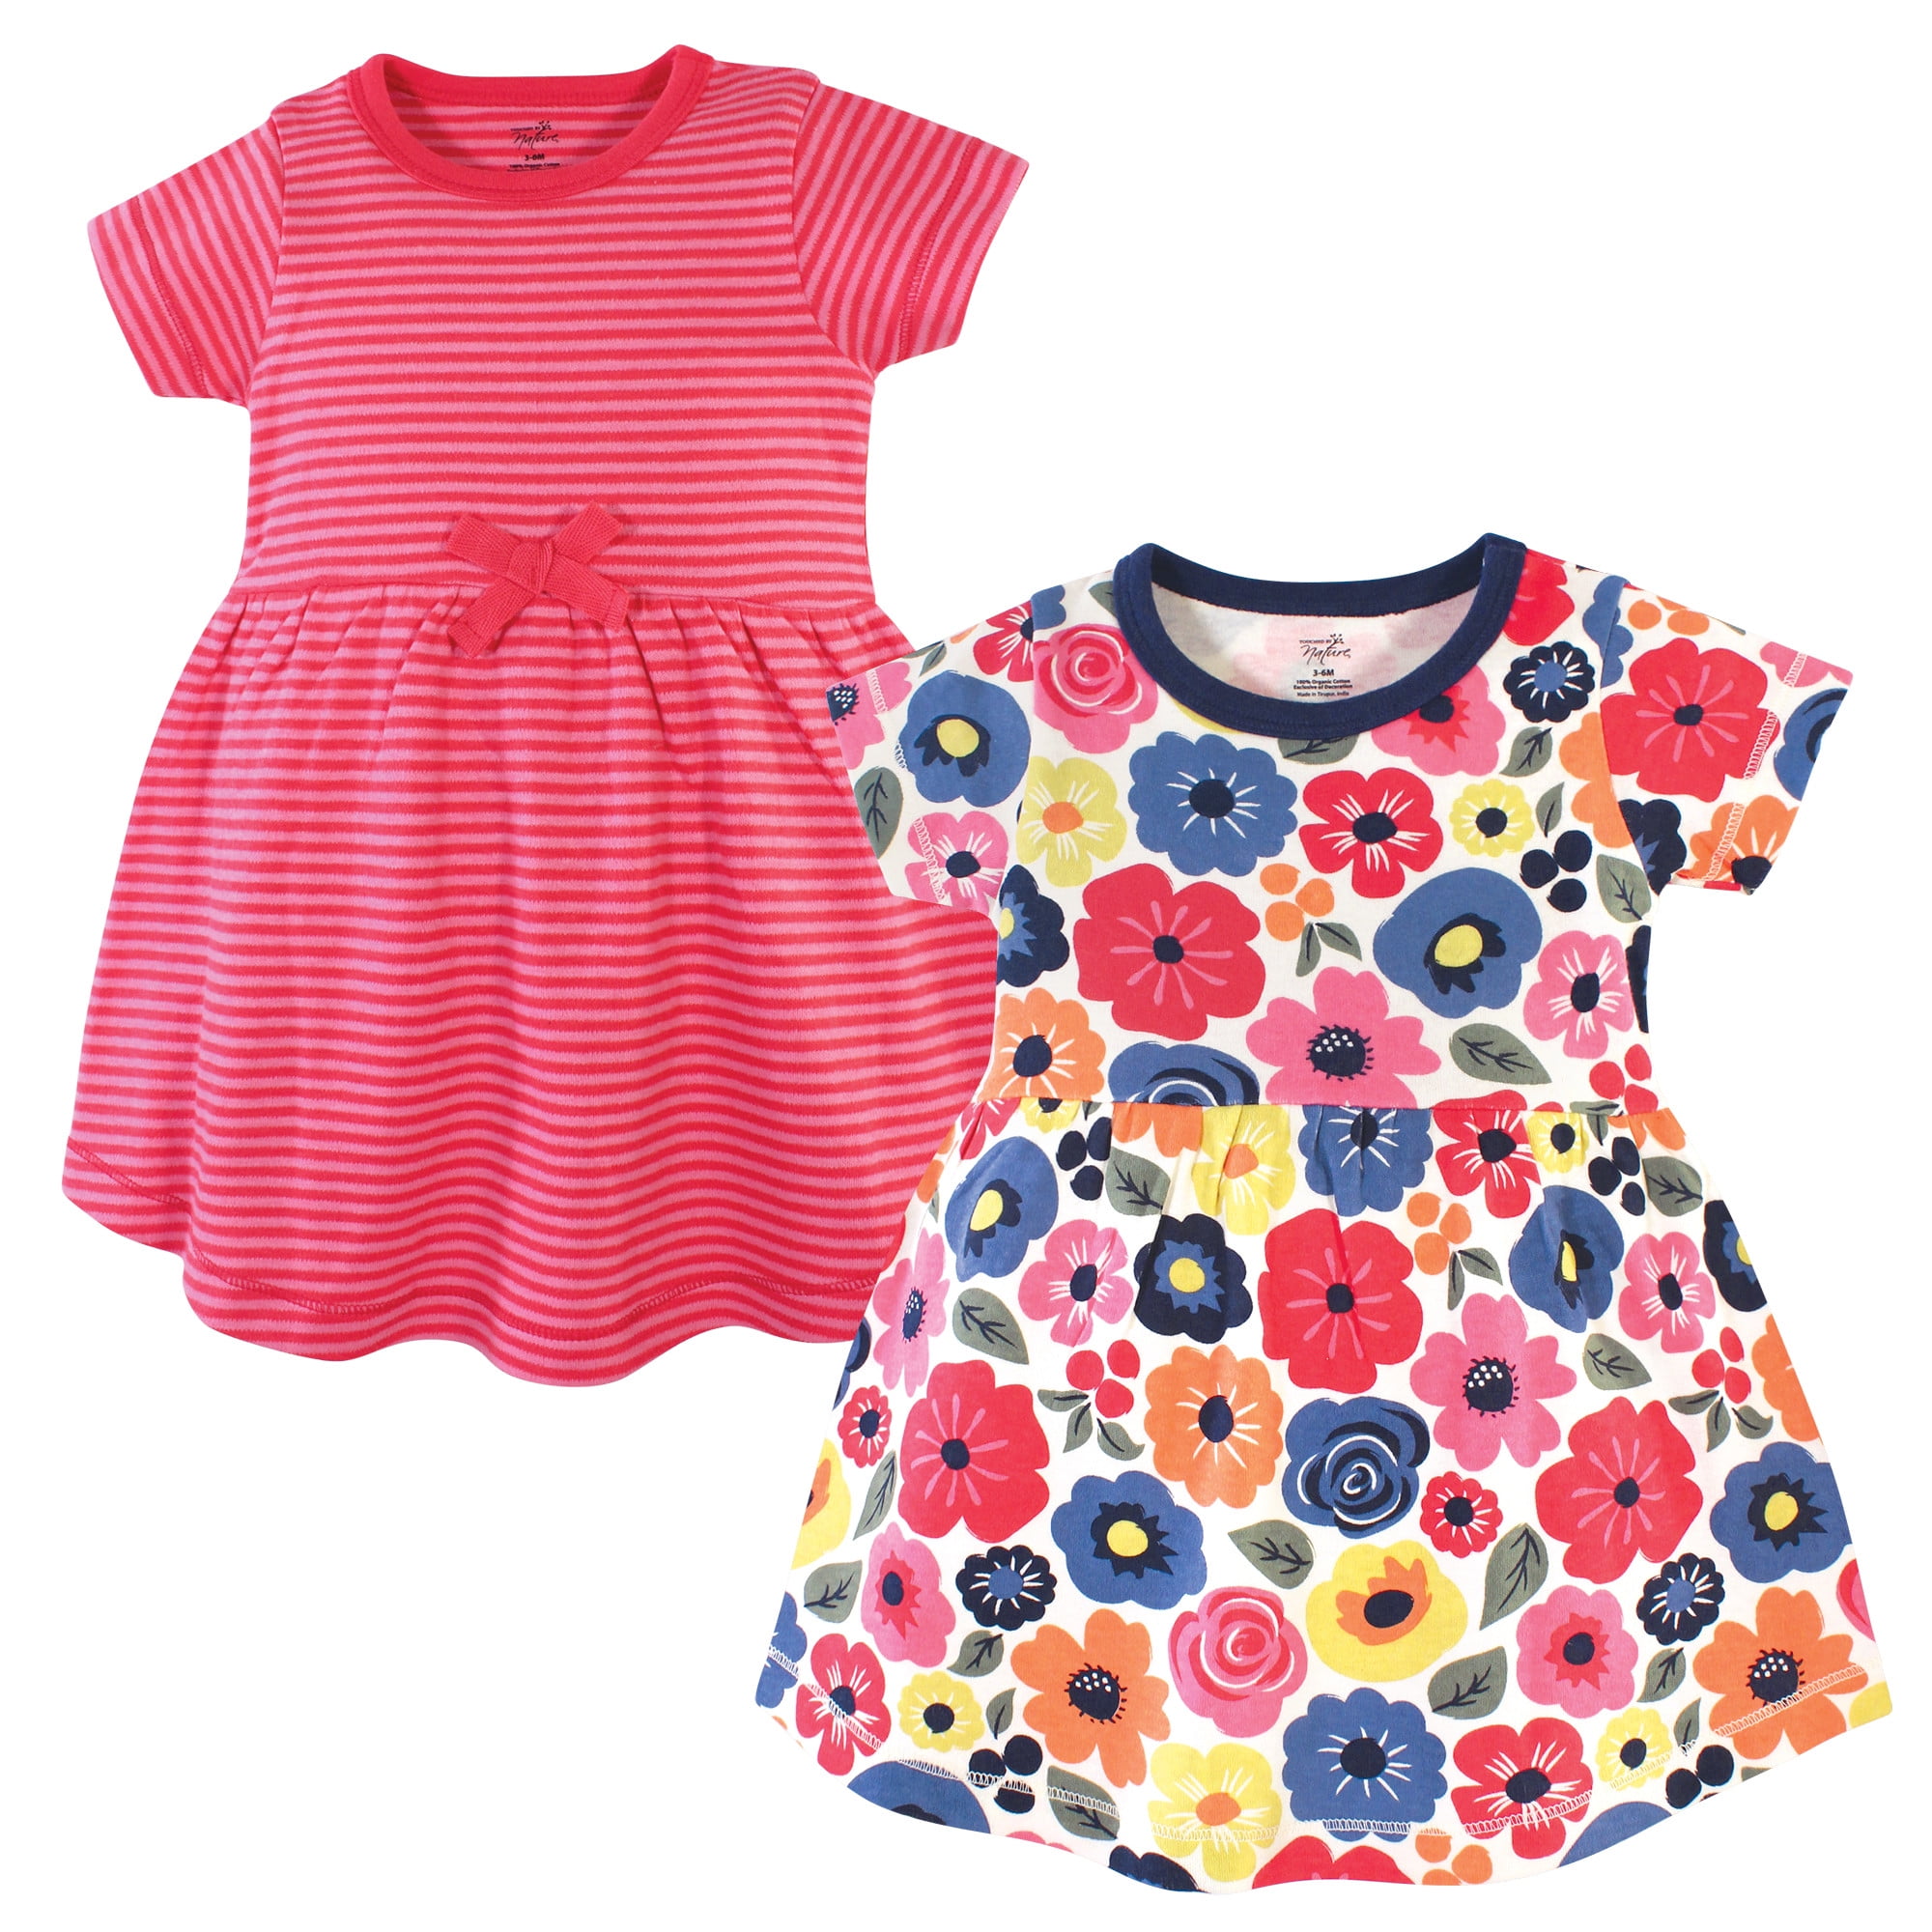 Touched by Nature - Touched by Nature Baby Girl Organic Cotton Dresses ...